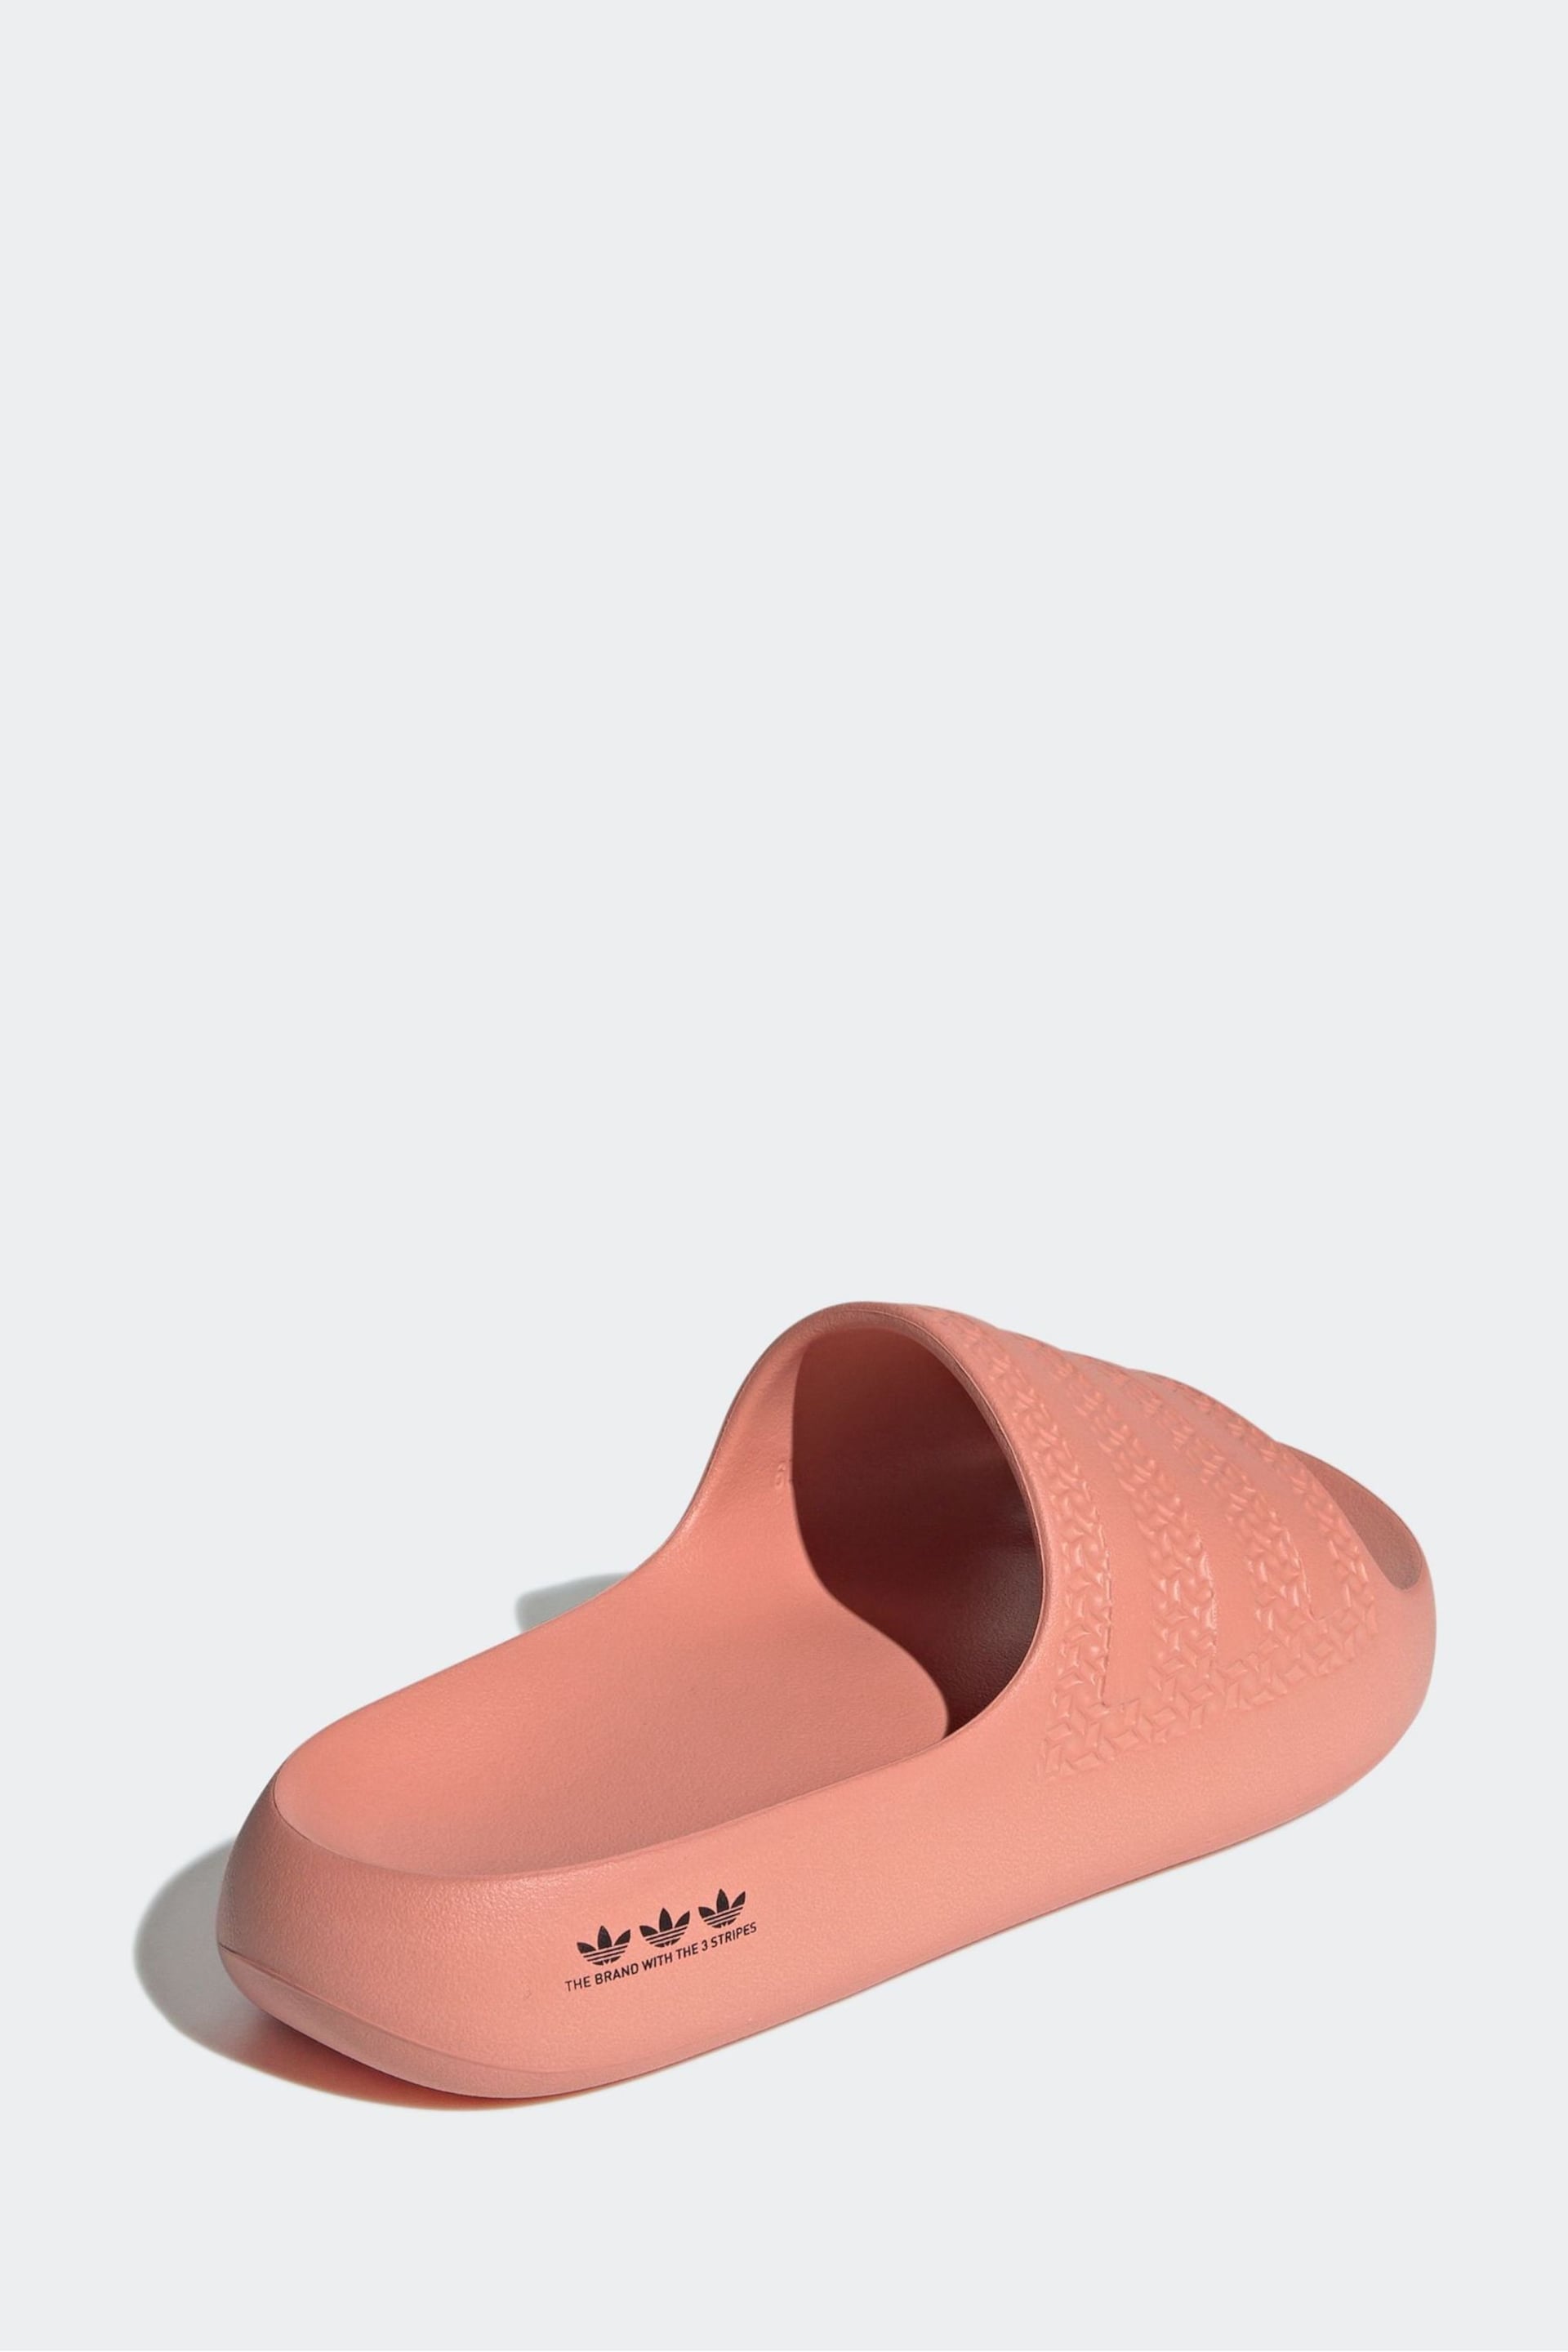 adidas Red Adilette Ayoon Sandals - Image 4 of 8